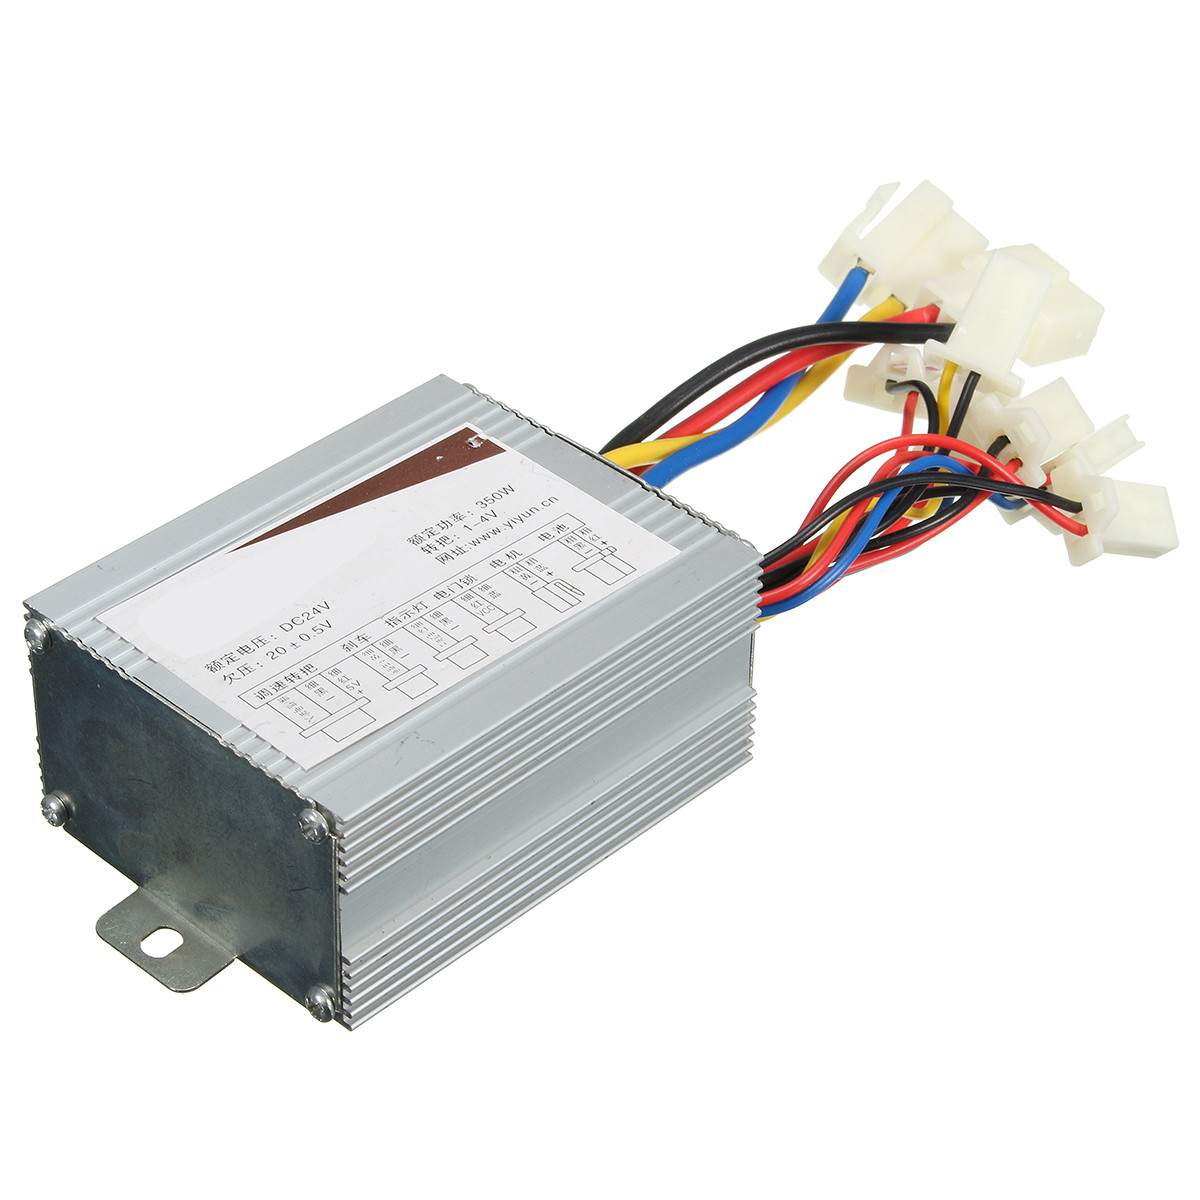 24V-350W-Motor-Brush-Speed-Controller-For-Electric-Bike-Bicycle-Scooter-E-Bike-1161604